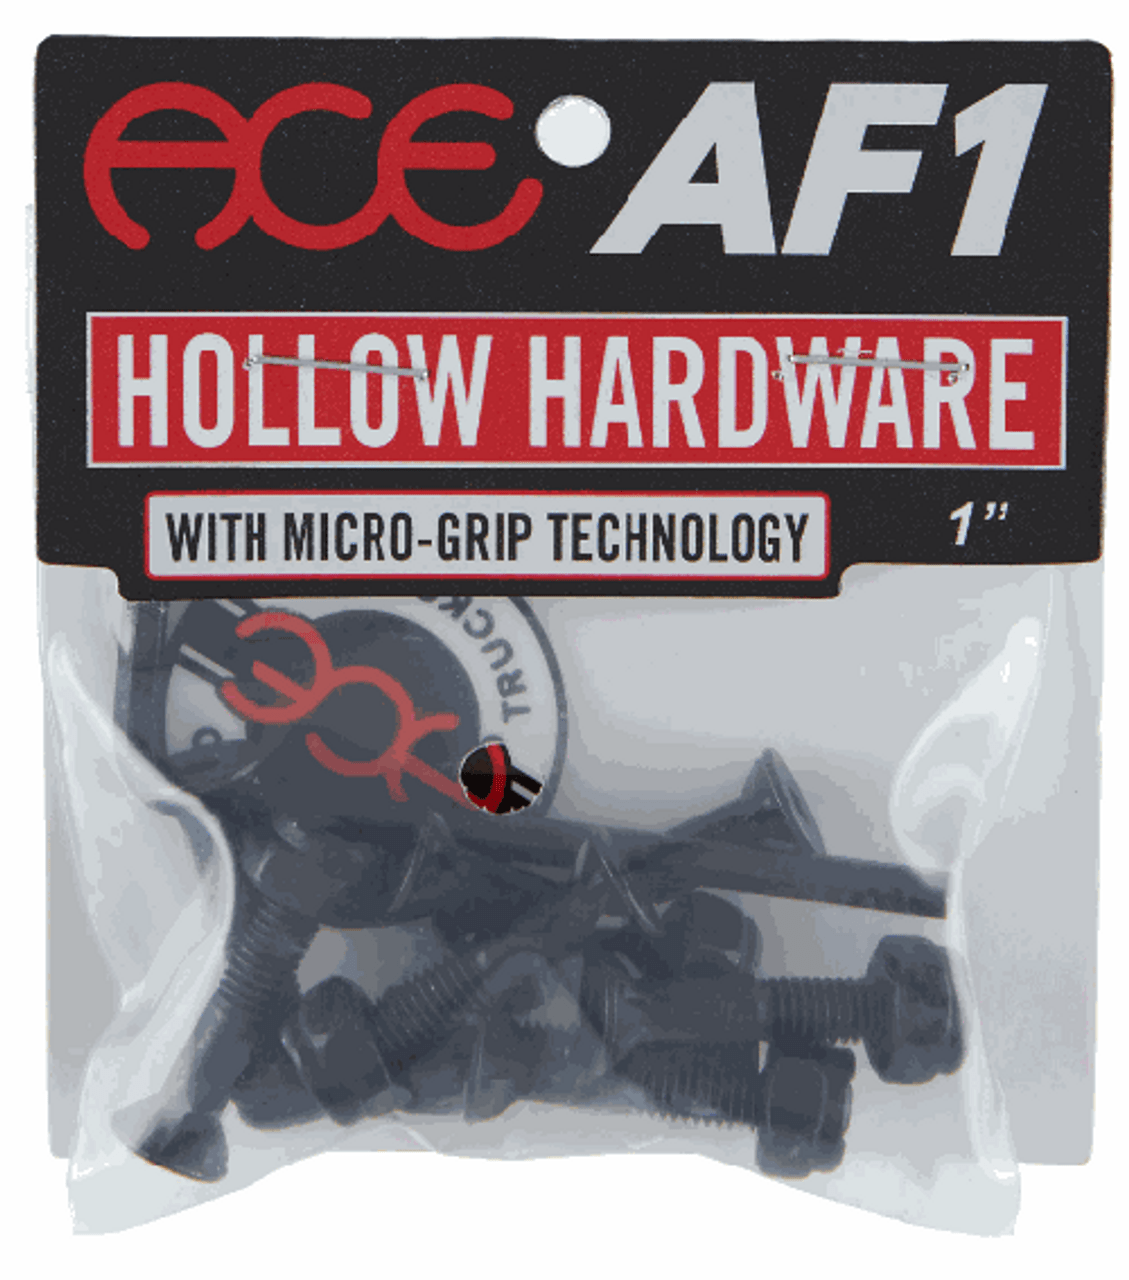 Ace 1" Hollow Hardware - Phillips